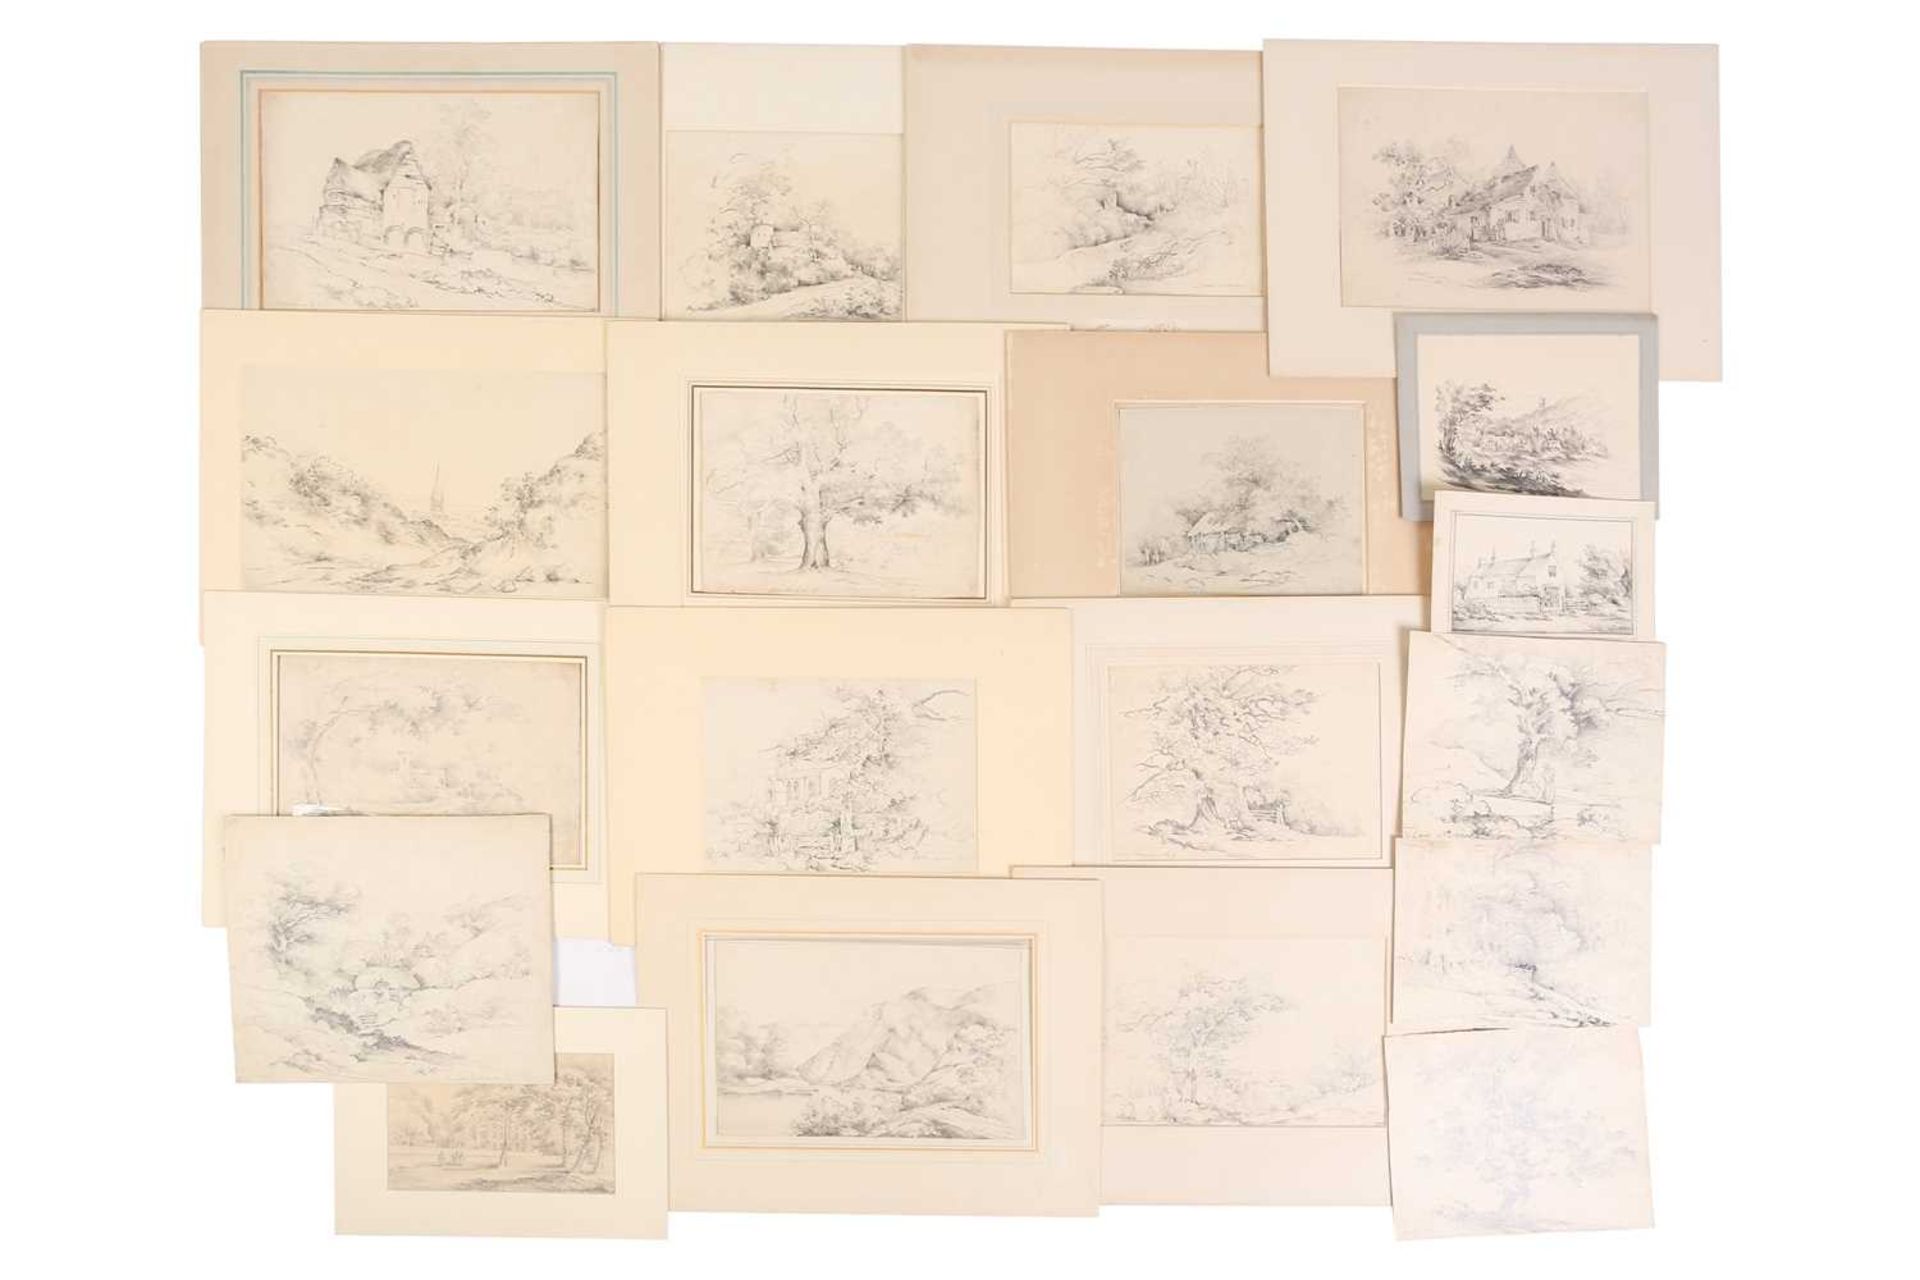 A folio of pencil works on paper by the Gurney family, some pupils of John Crome (1768-1821),